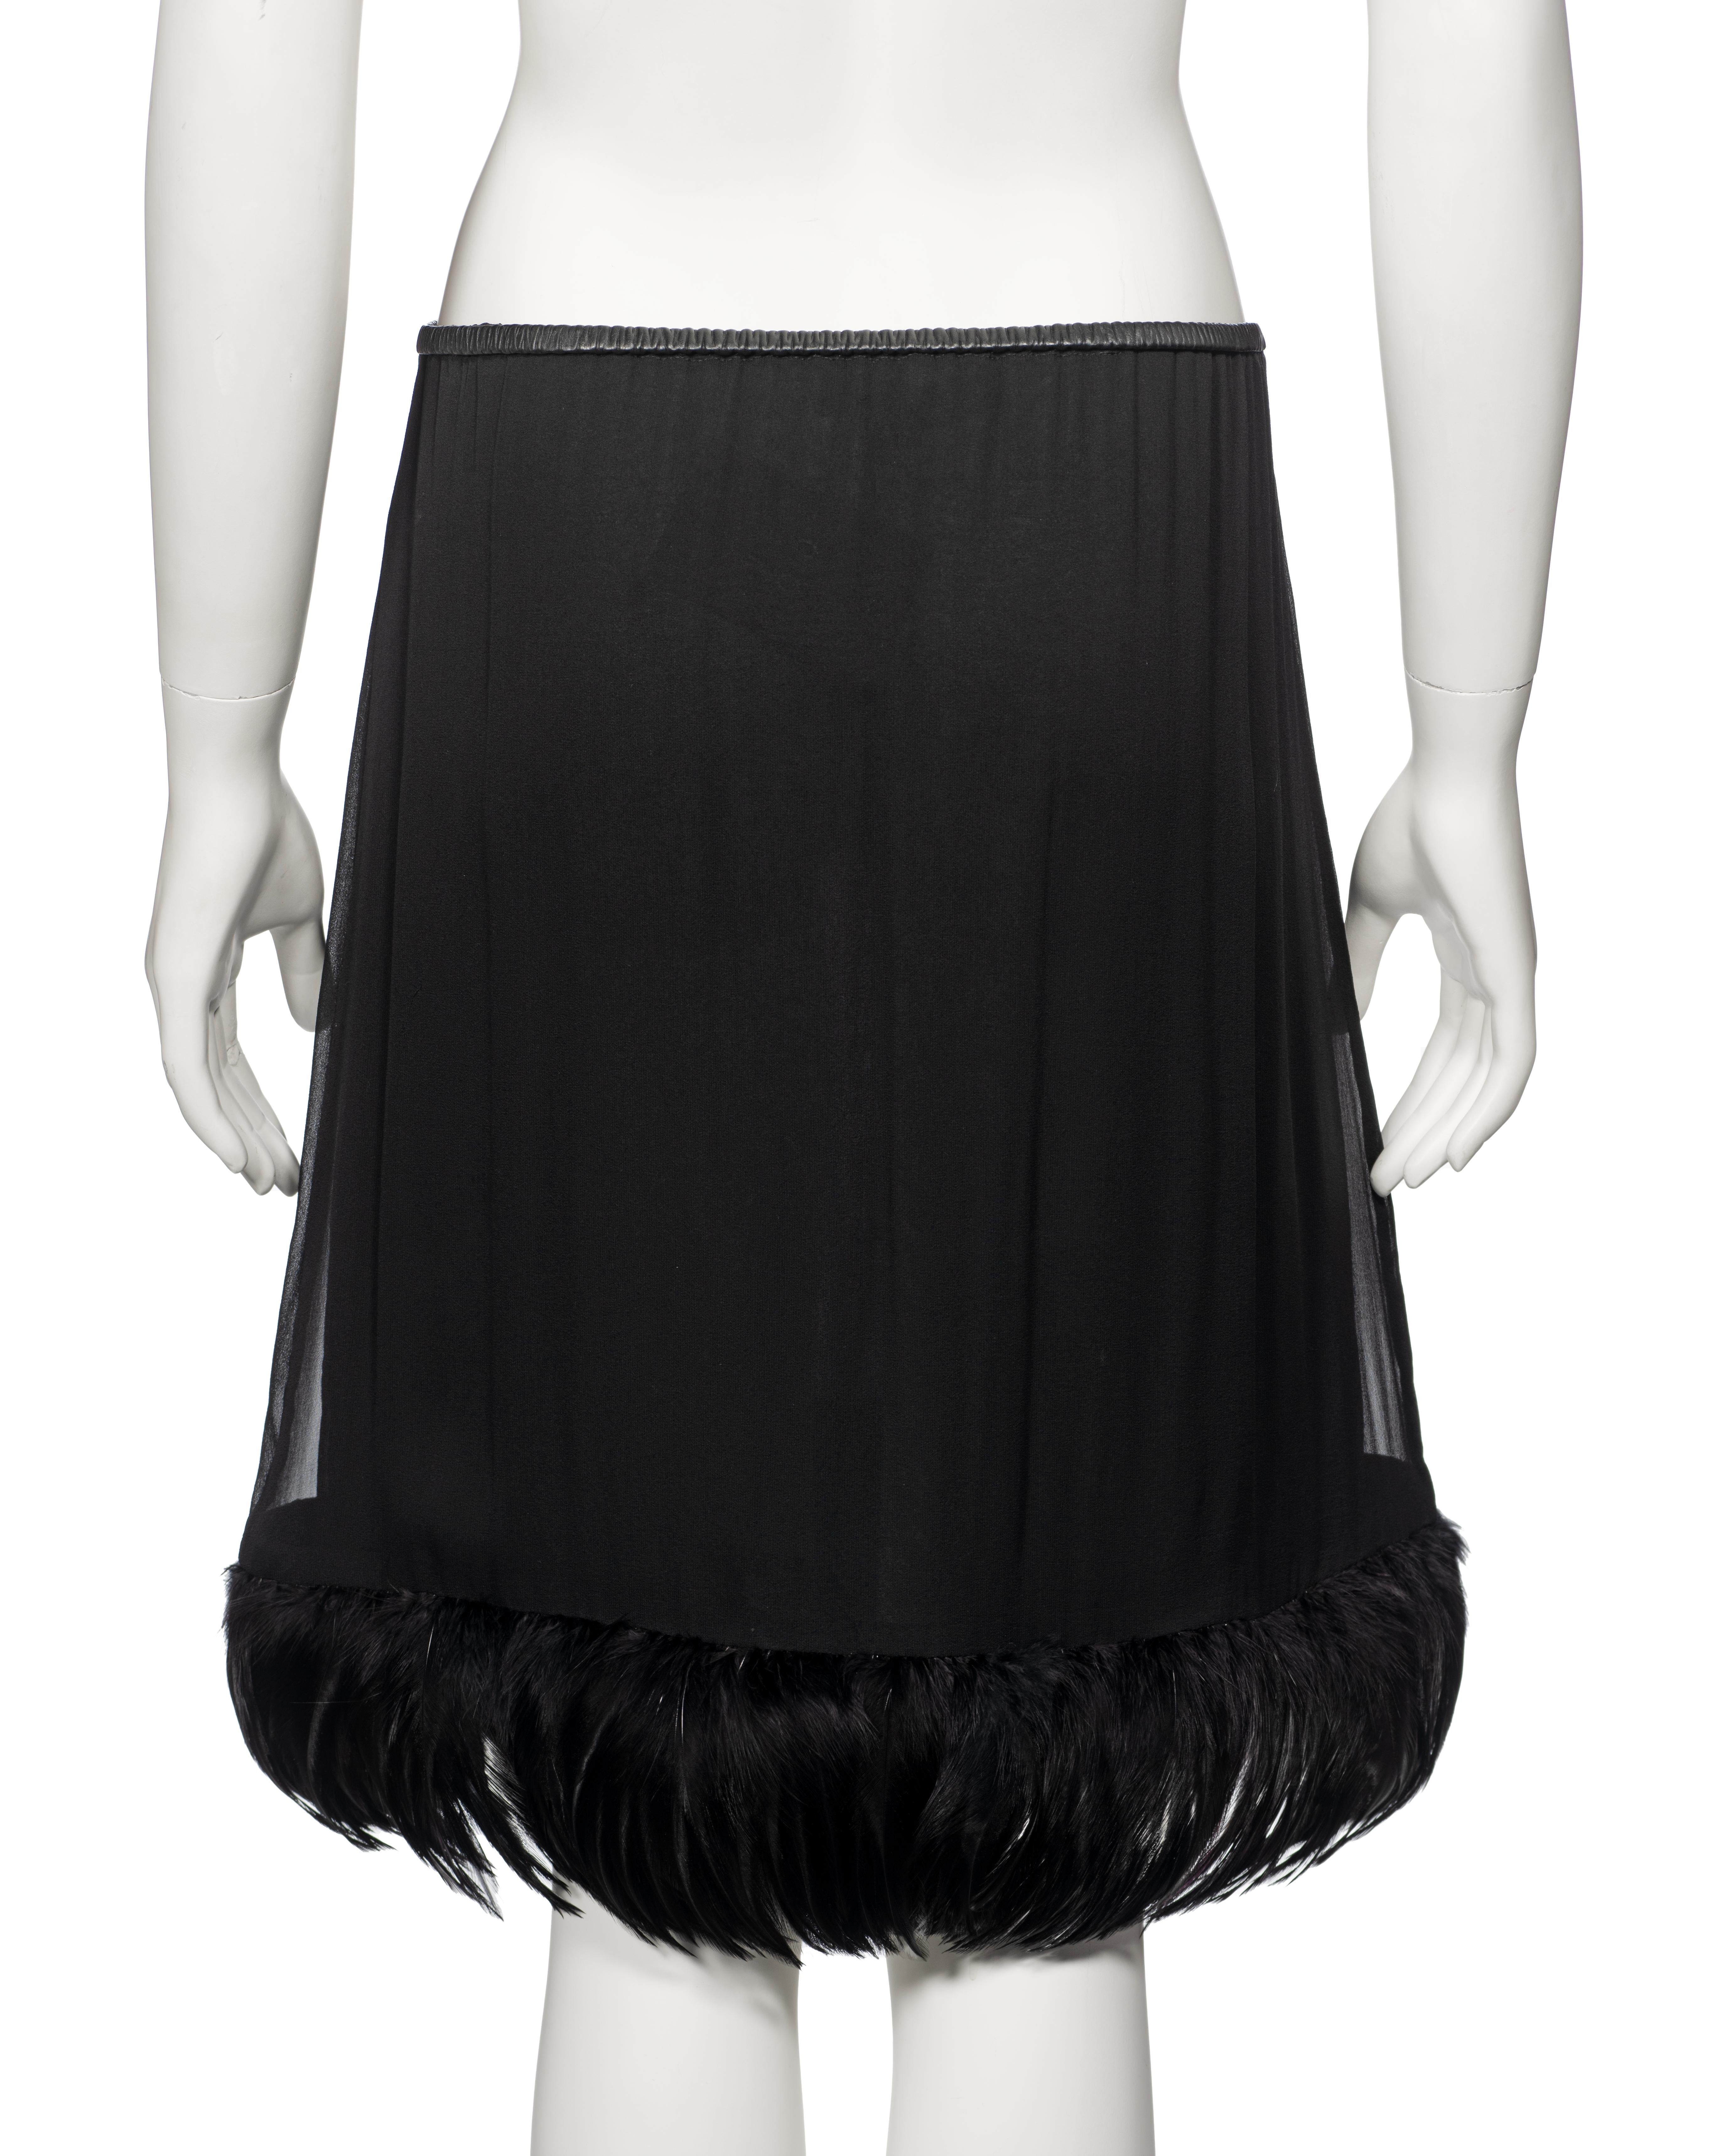 Gucci by Tom Ford Black Silk Evening Skirt With Feathers, ss 1999 For Sale 6